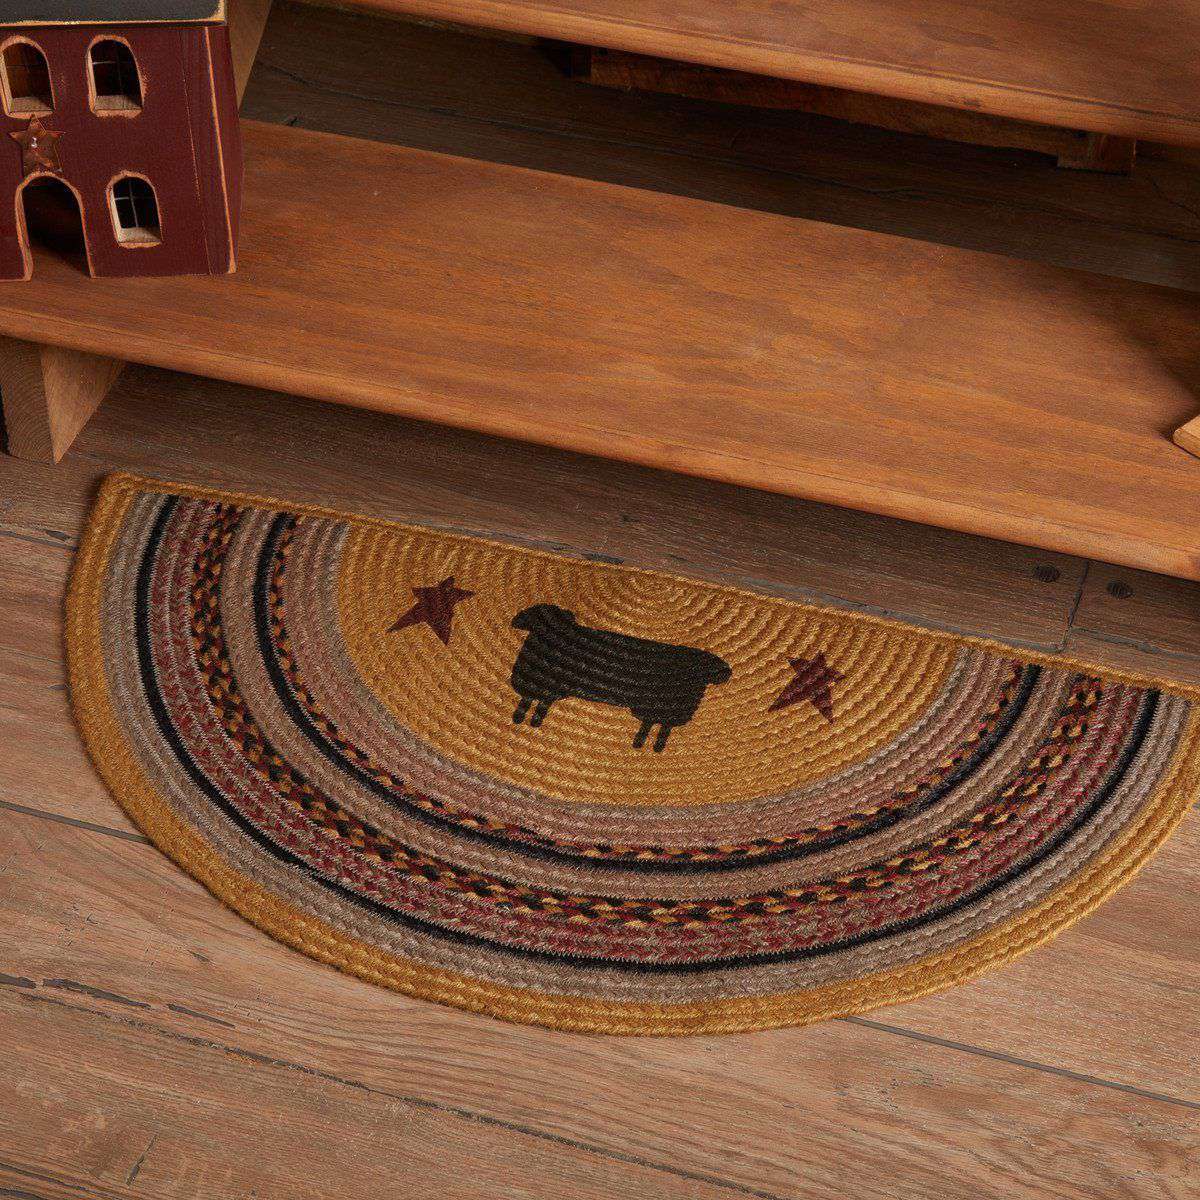 Kettle Grove Oval Braided Rug w/ Pad - Retro Barn Country Linens